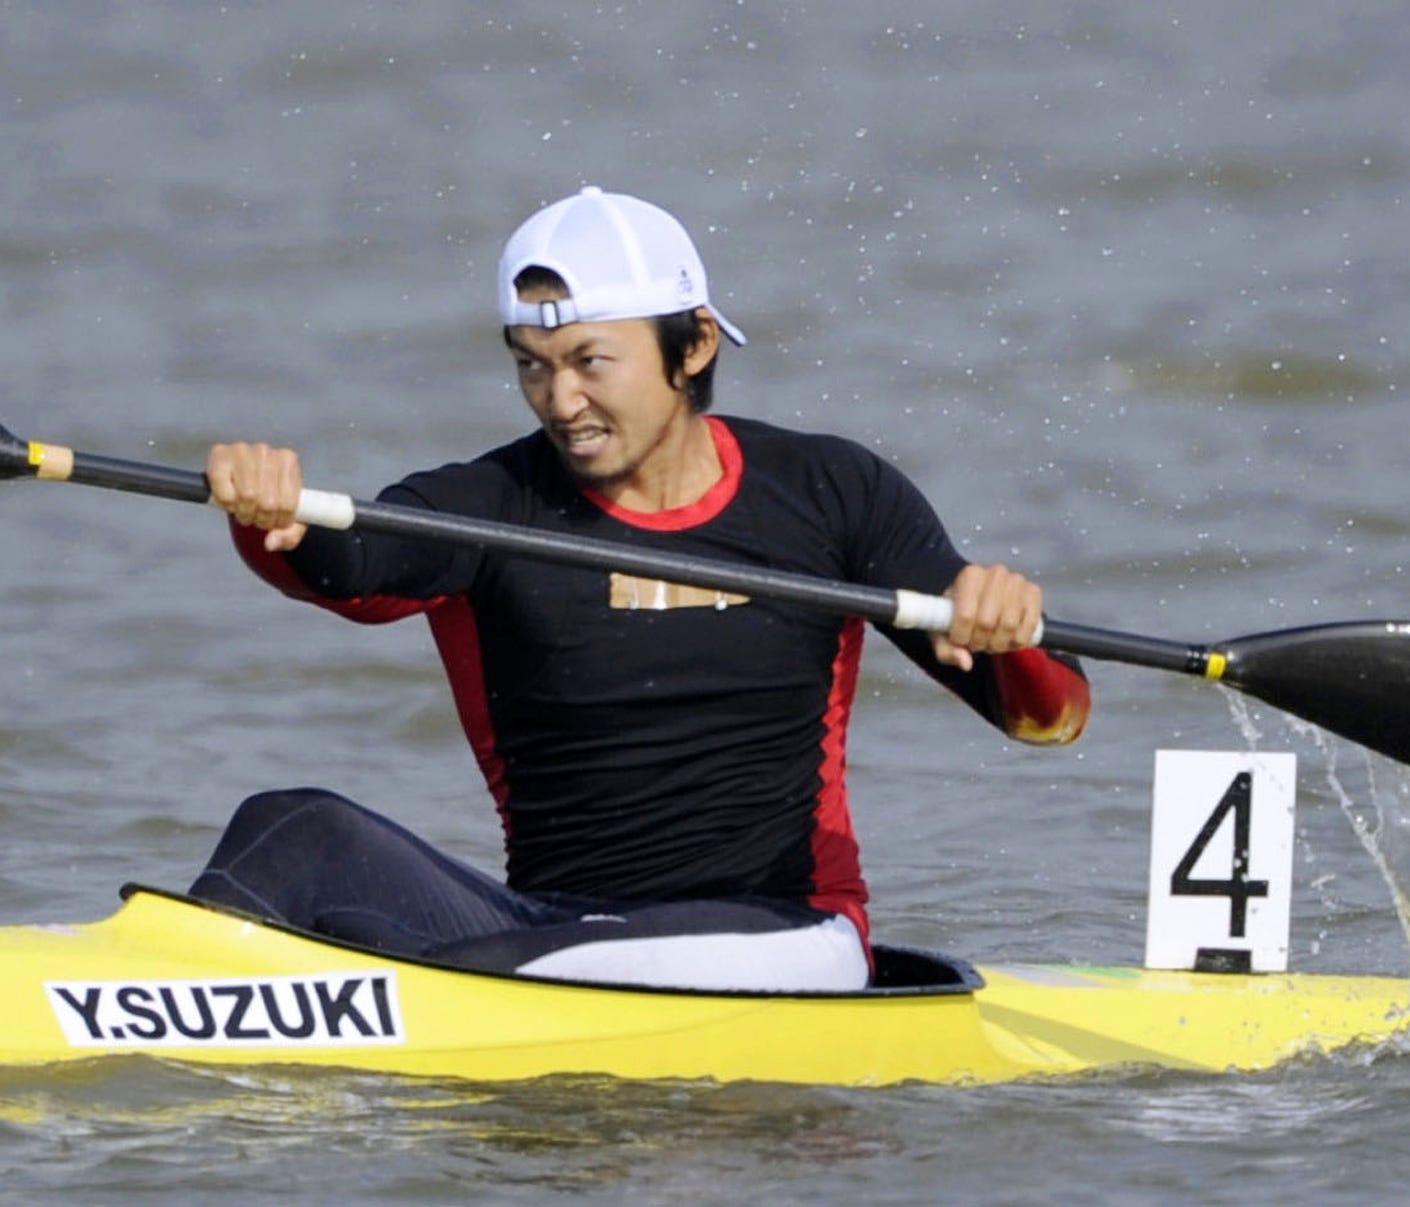 In this November 2010, photo, Japan's Yasuhiro Suzuki competes in the mens single kayak race at the 16th Asian Games in Shanwei, China. The top Japanese canoe sprinter has been banned for eight years, disqualifying him from the Tokyo Olympics, for la